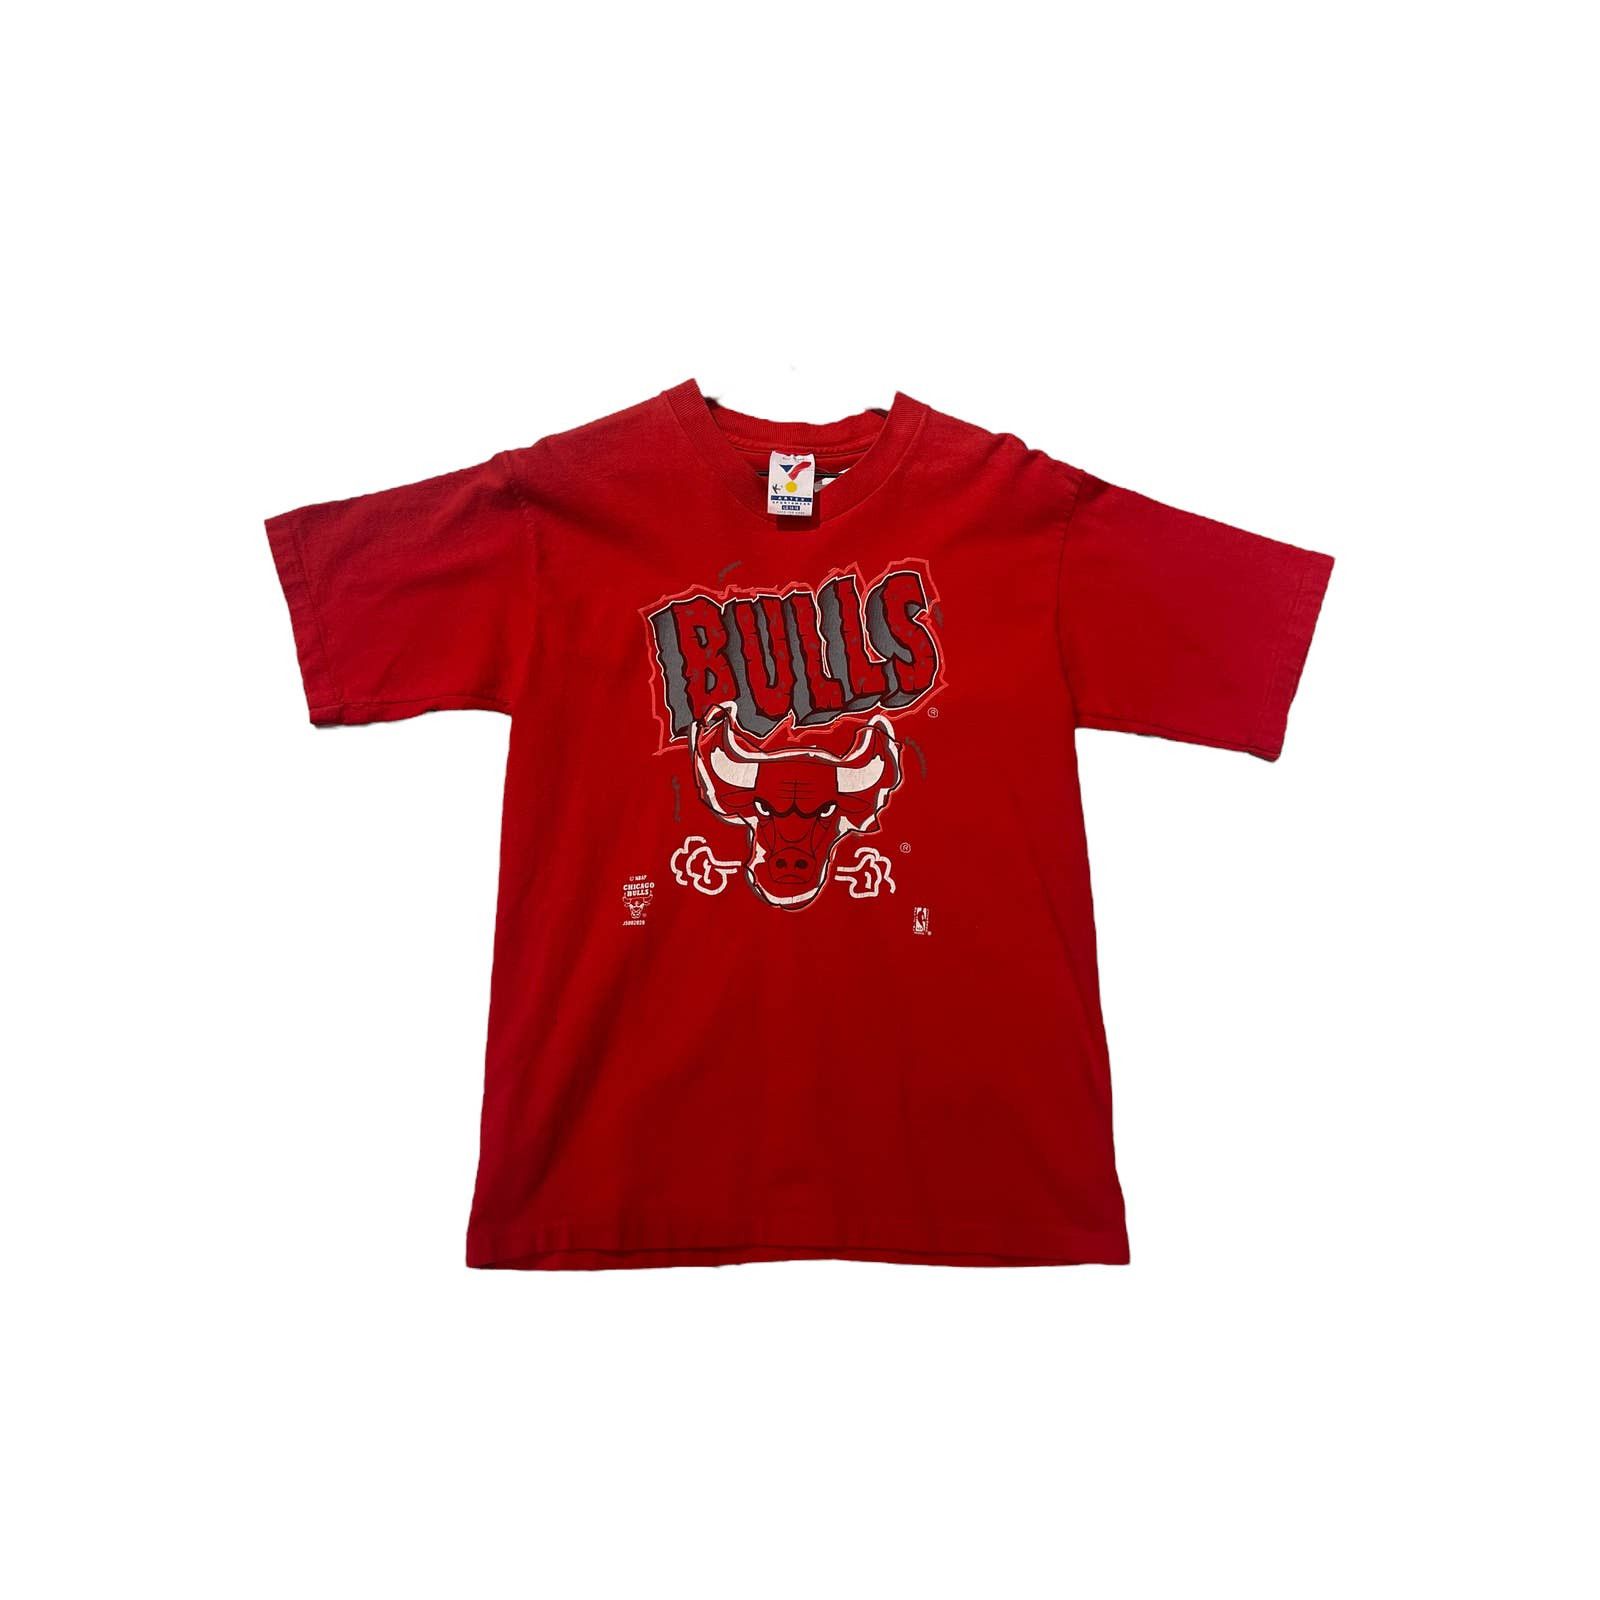 Made In Usa Vintage Chicago Bulls Shirt | Grailed